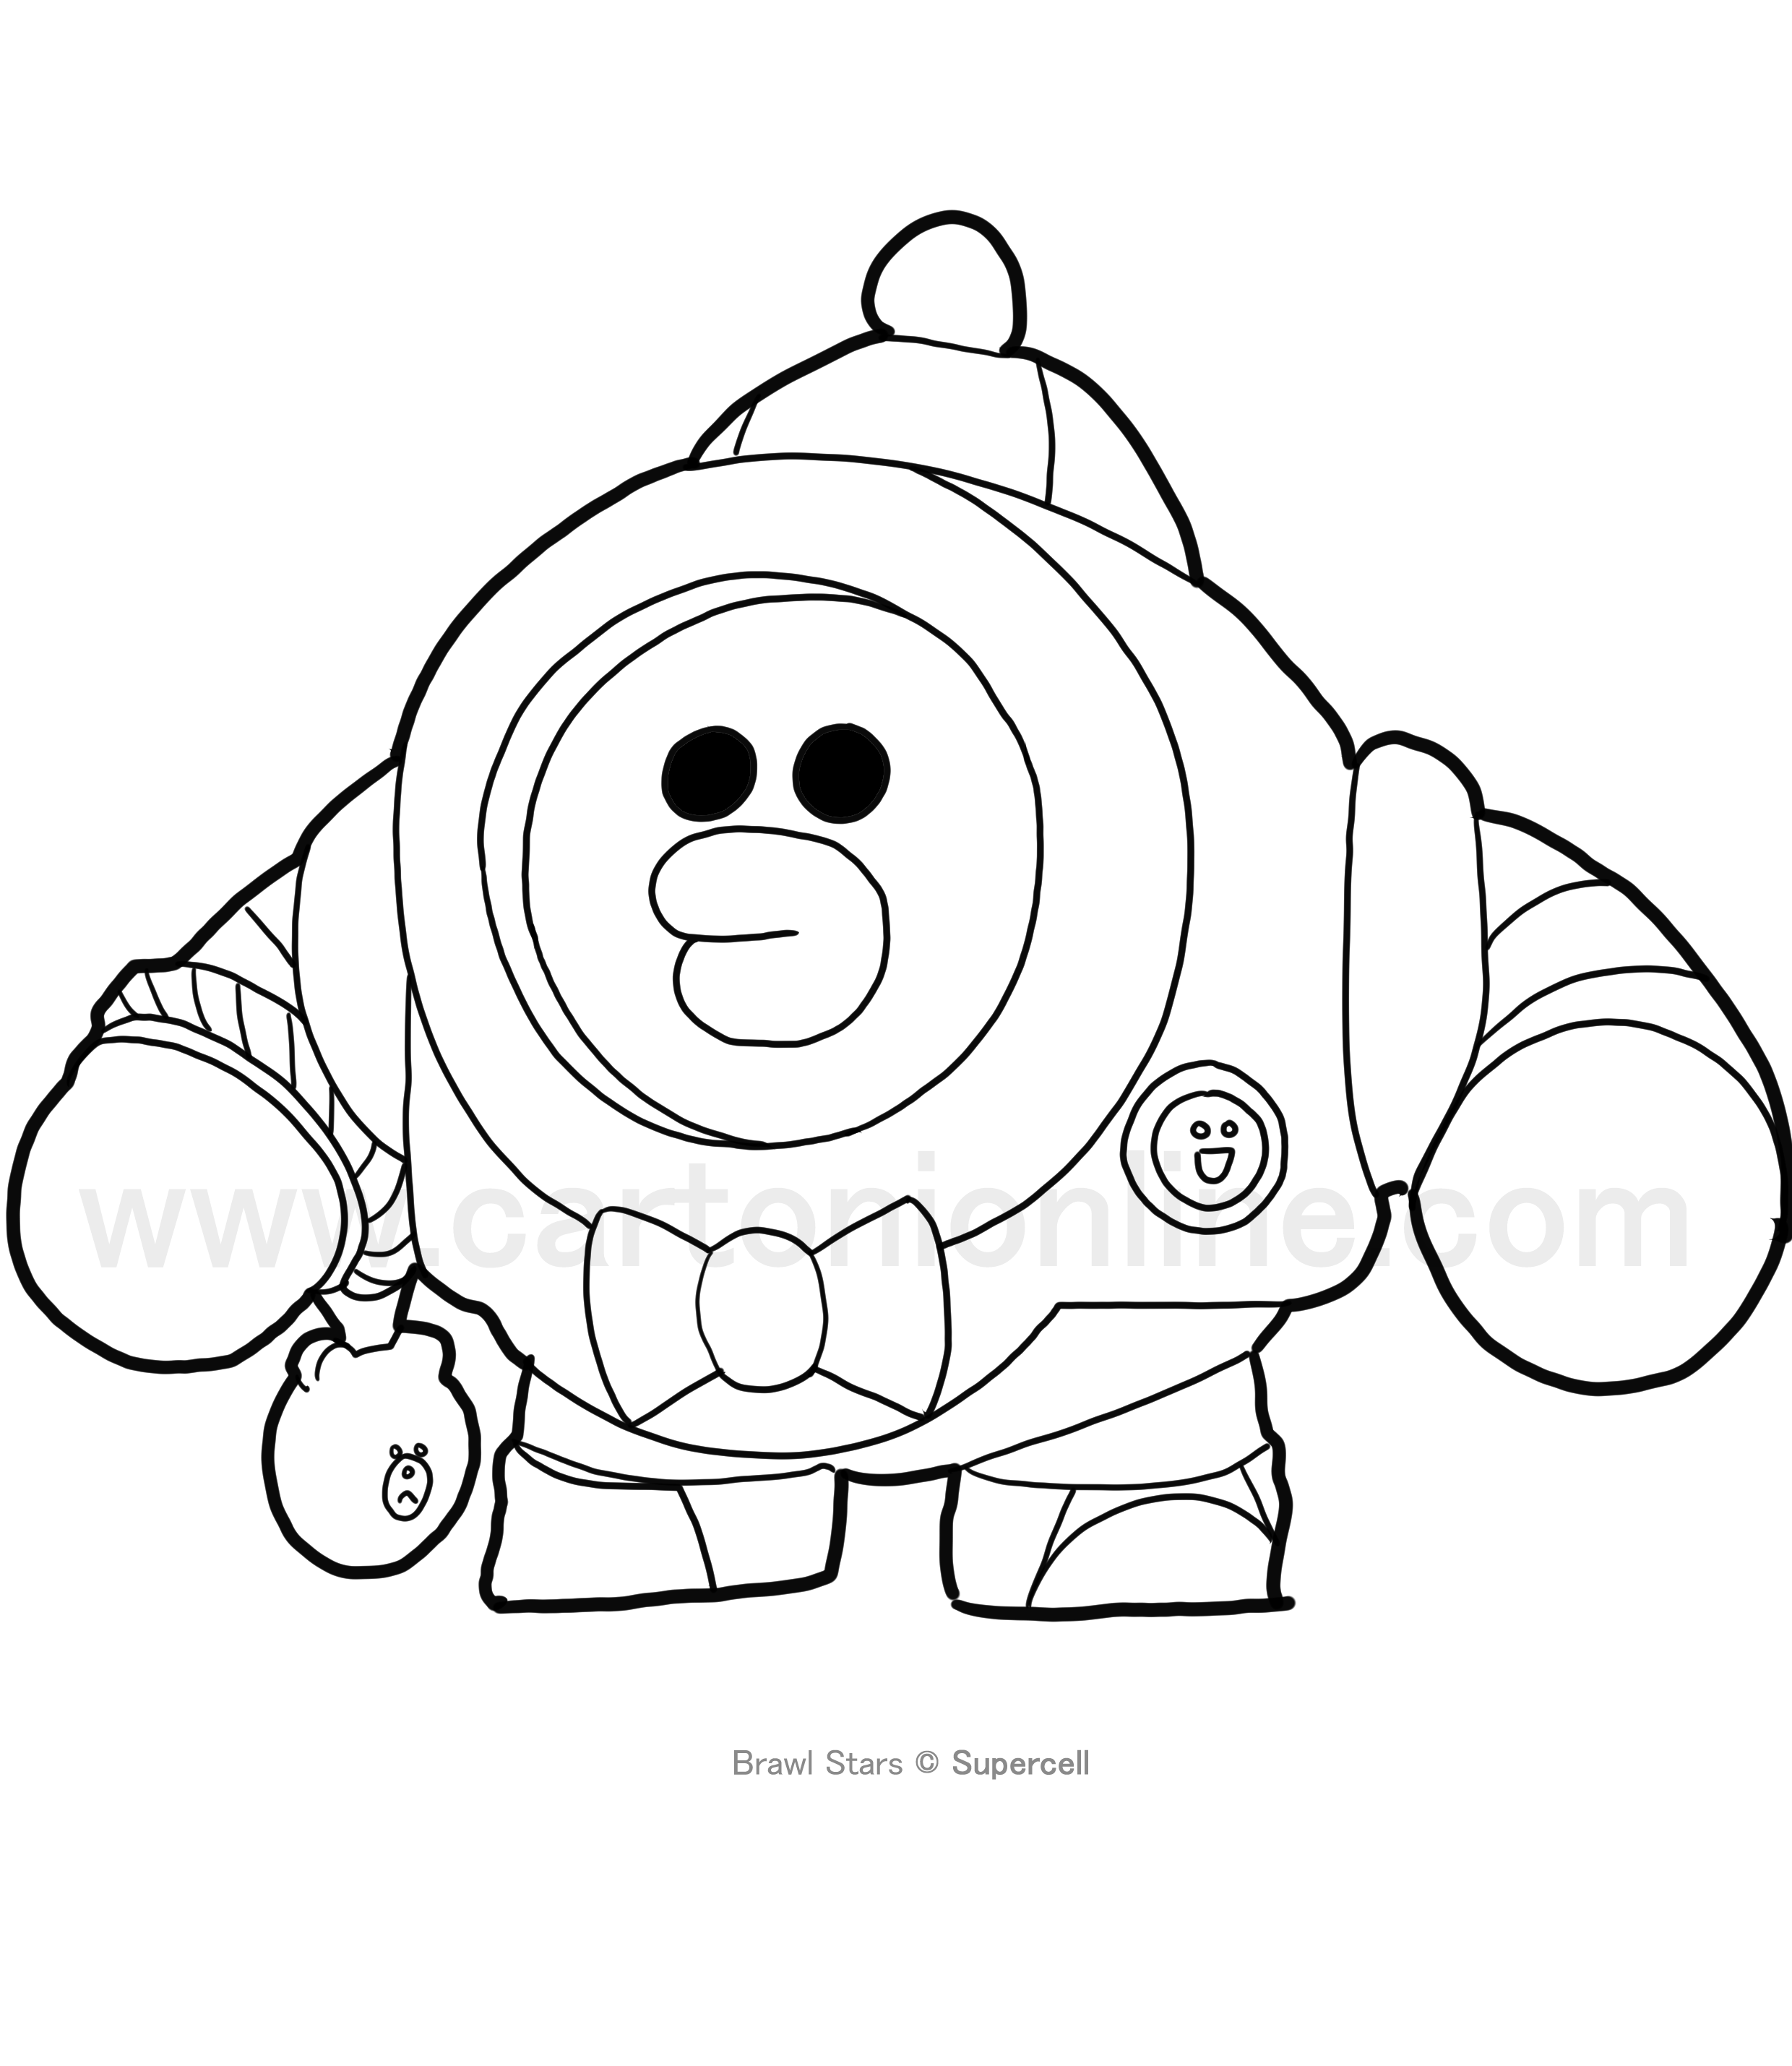 Sally Nani from Brawl Stars coloring page to print and coloring